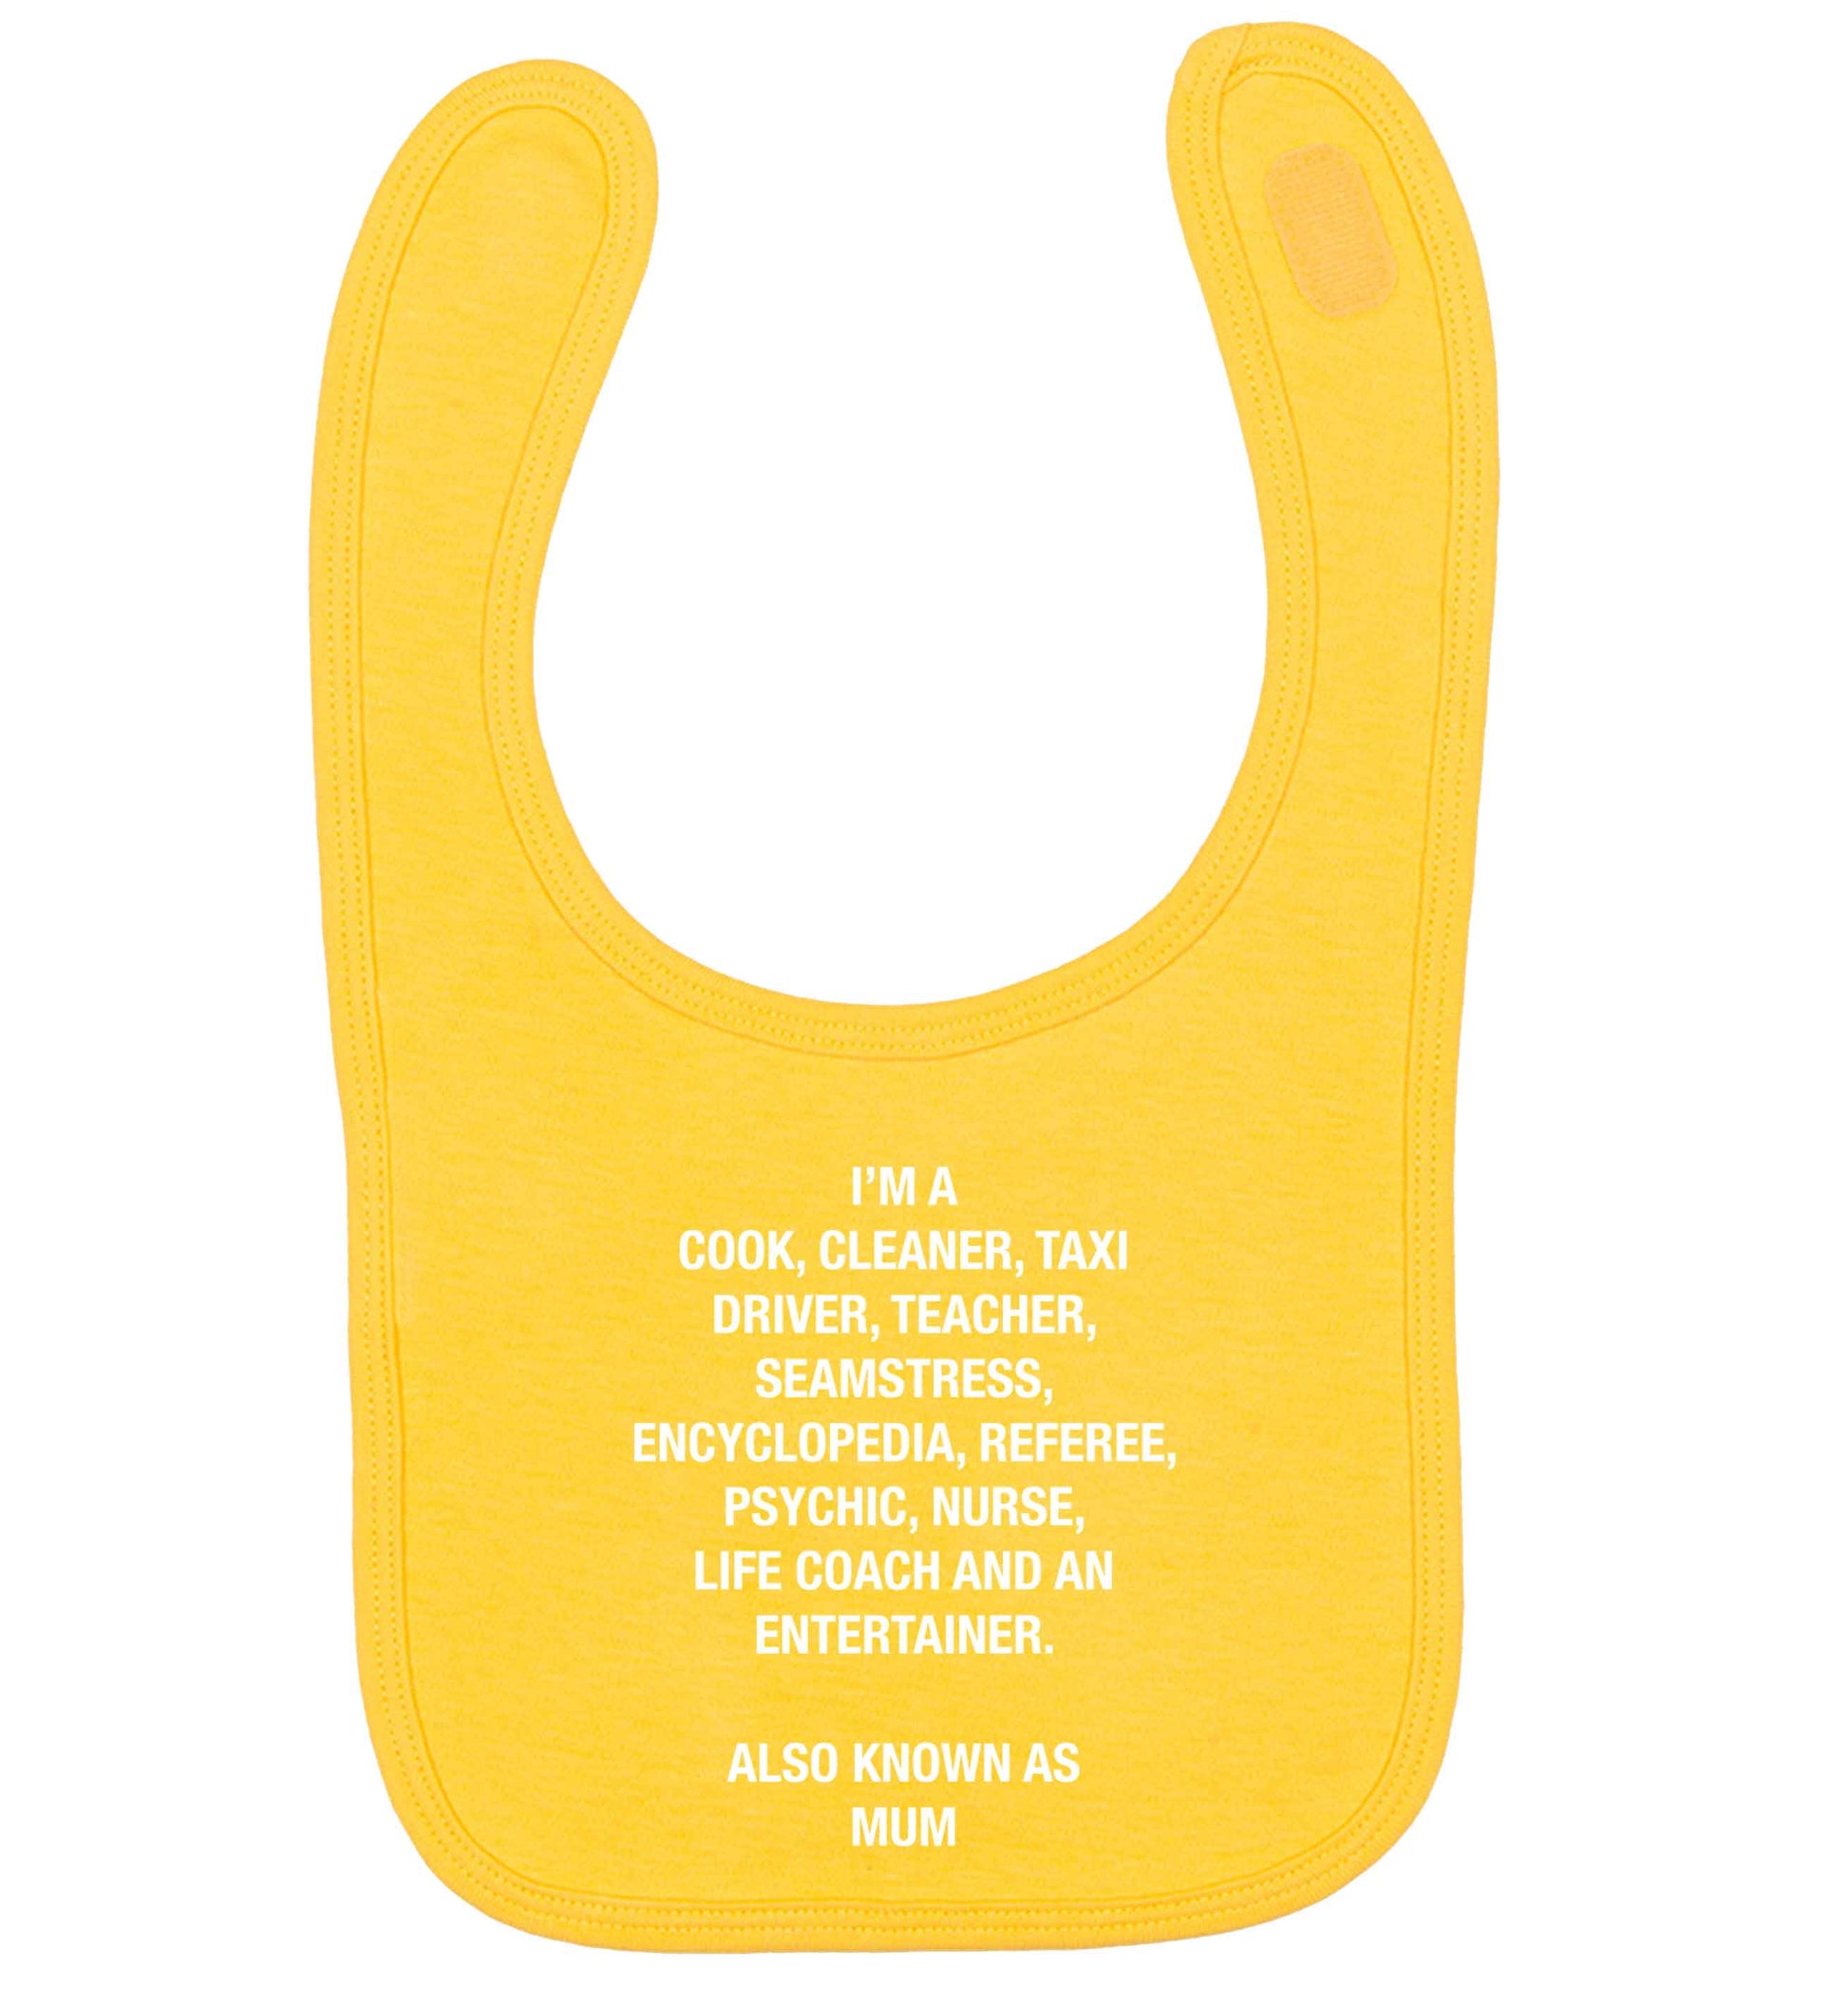 Funny gifts for your mum on mother's dayor her birthday! Mum, cook, cleaner, taxi driver, teacher, seamstress, encyclopedia, referee, psychic, nurse, life coach and entertainer yellow baby bib